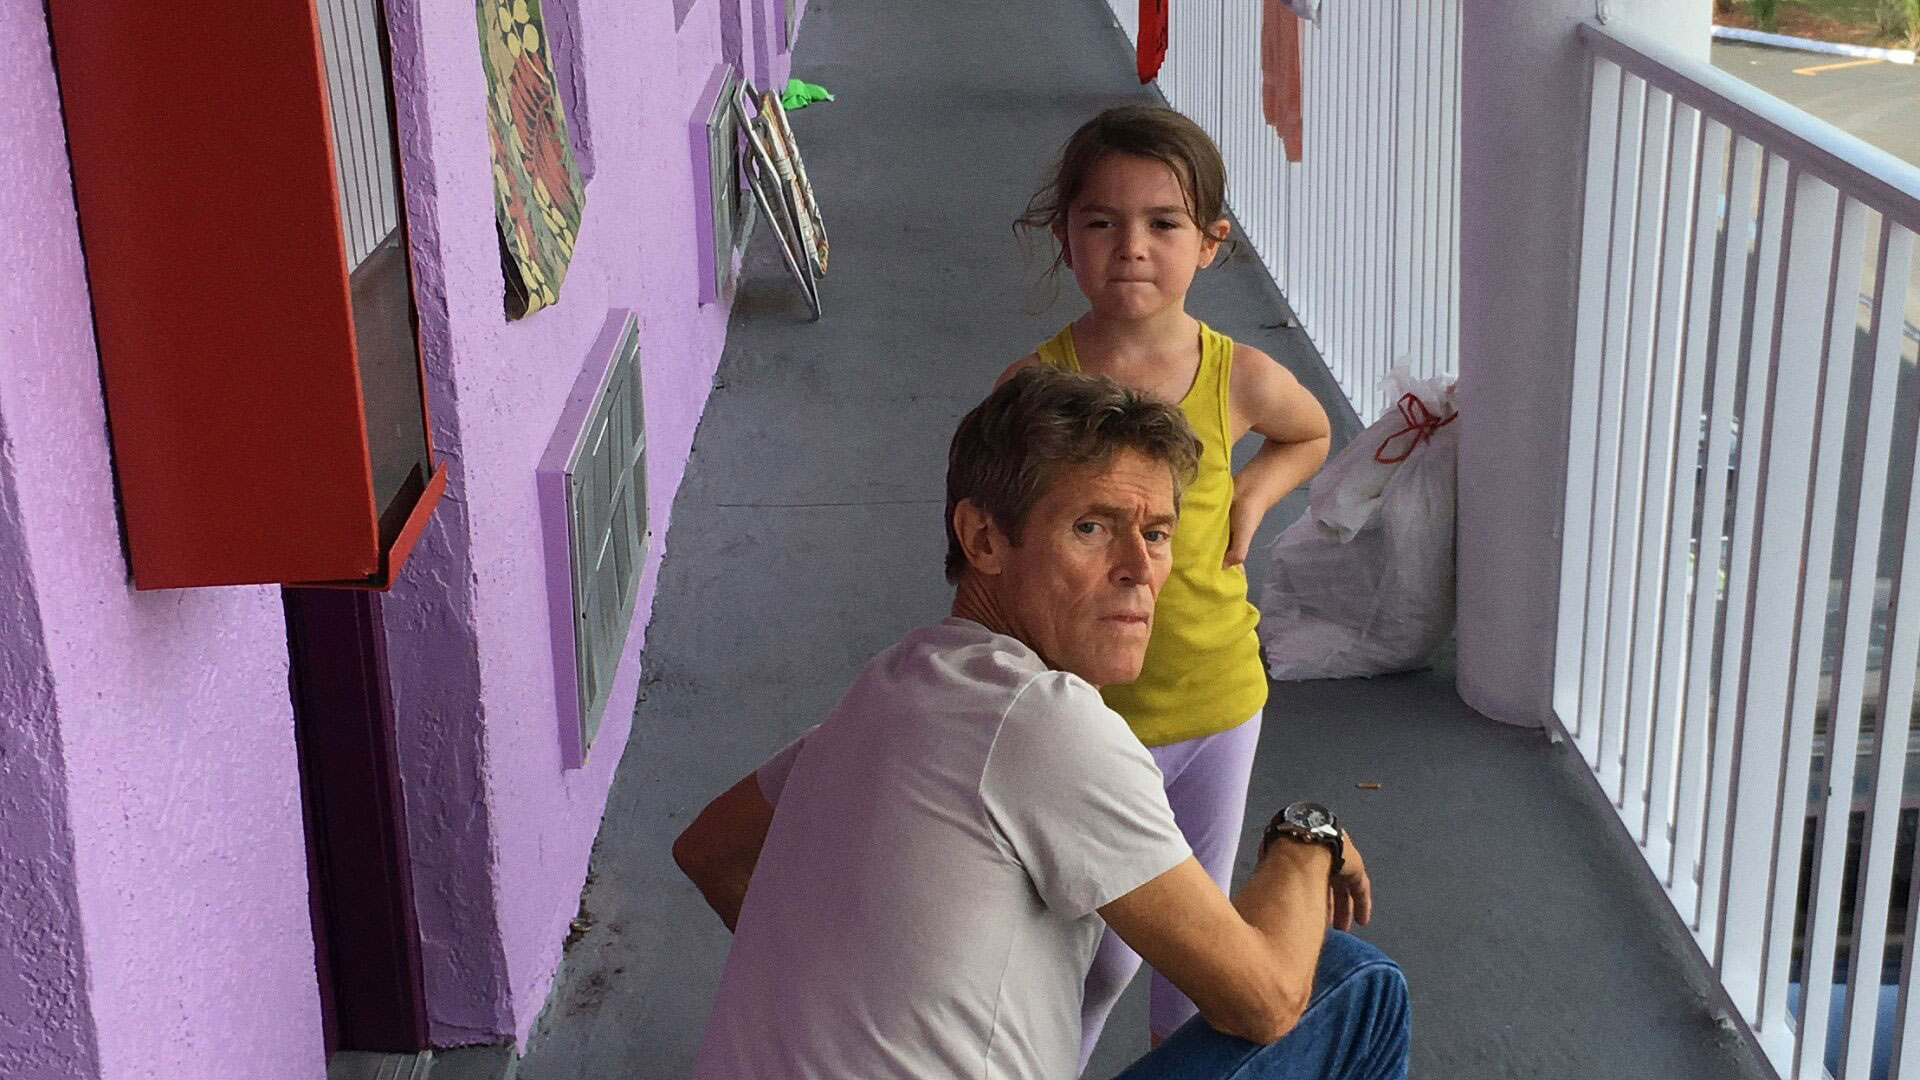 The Florida Project — Dafoe and Child